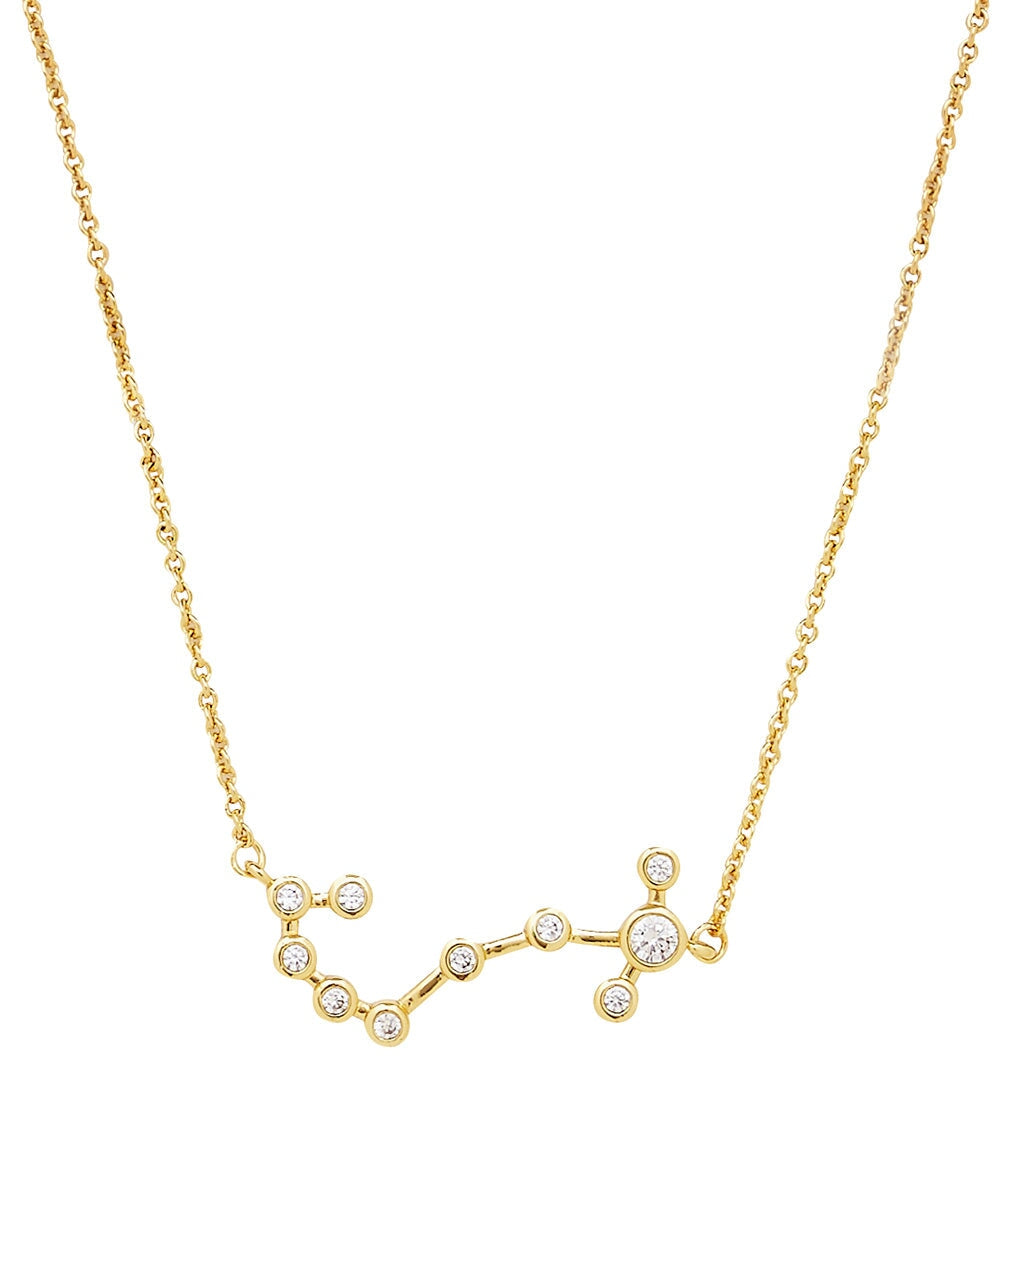 'When Stars Align' Constellation Necklace Necklace Sterling Forever Gold Scorpio (Oct 23 - Nov 21) 